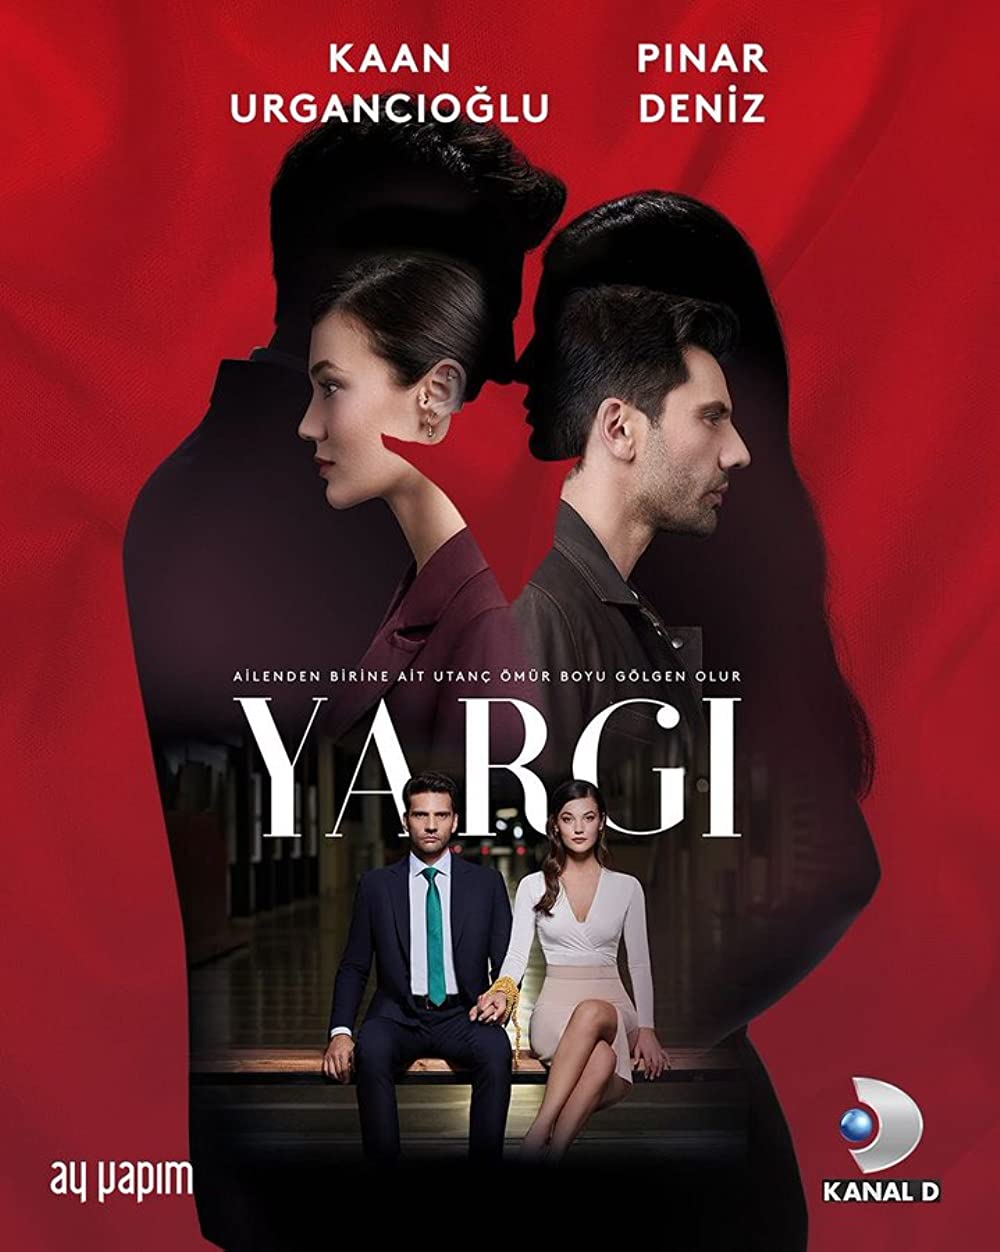 Yargi TV Series (2021) Cast & Crew, Release Date, Story, Episodes, Review, Poster, Trailer
